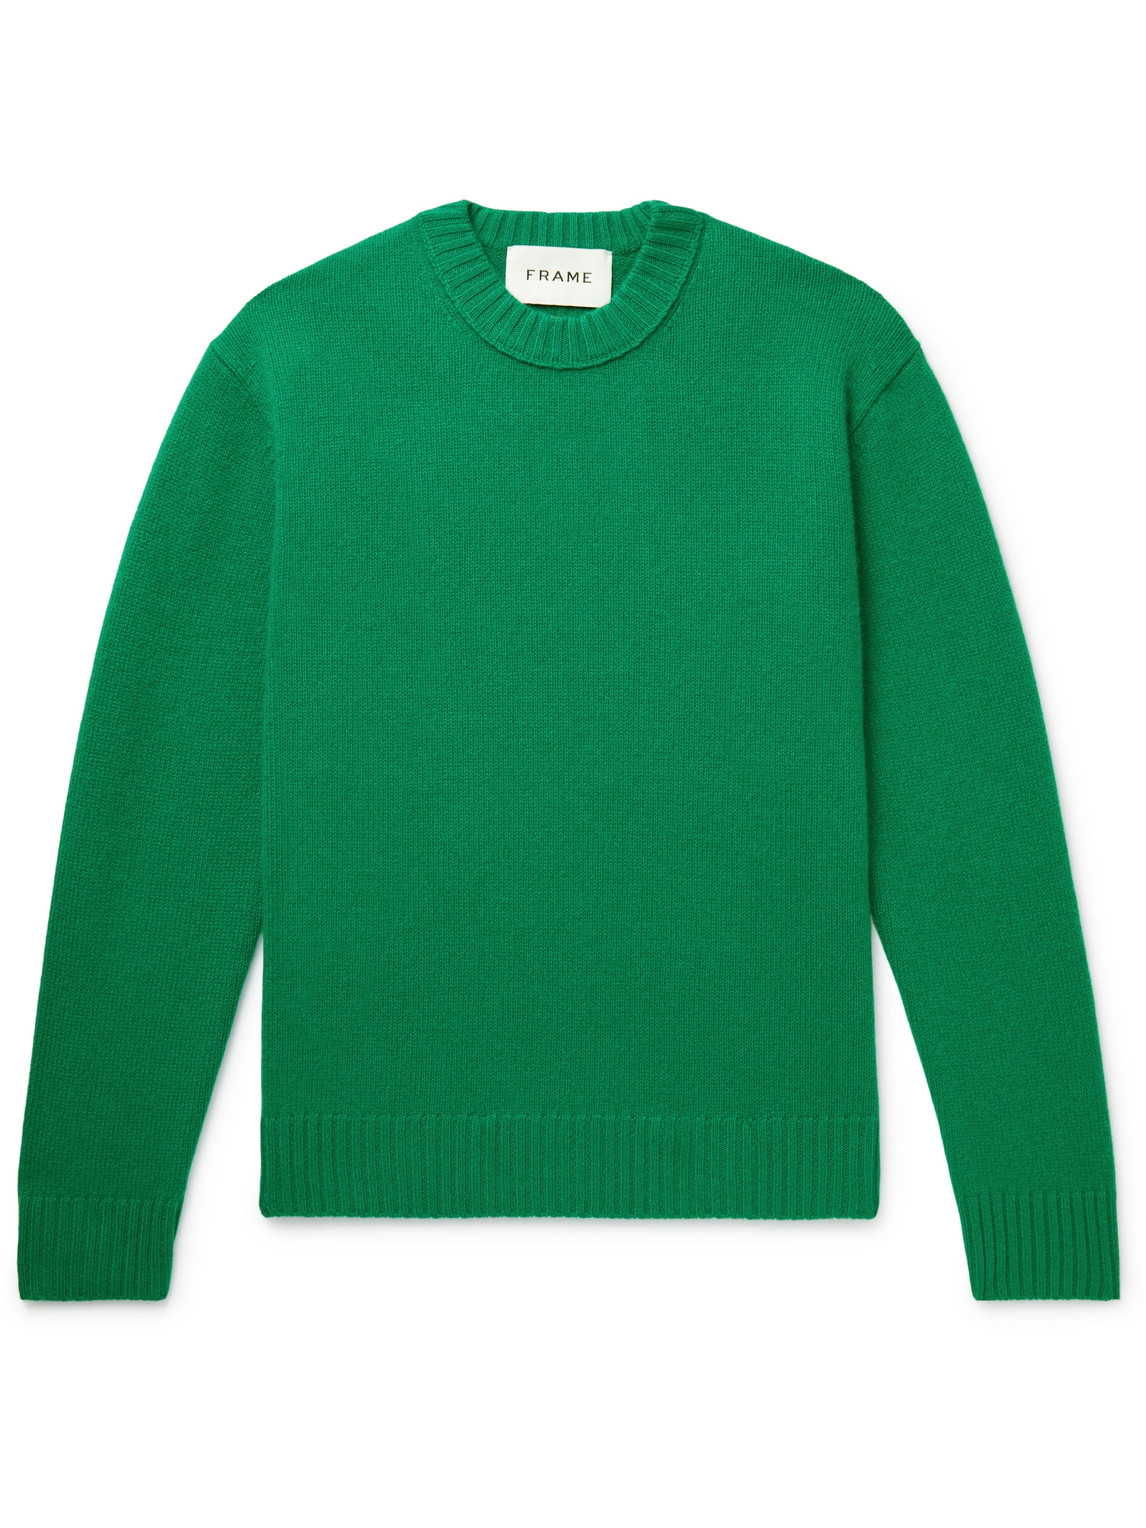 FRAME CASHMERE SWEATER